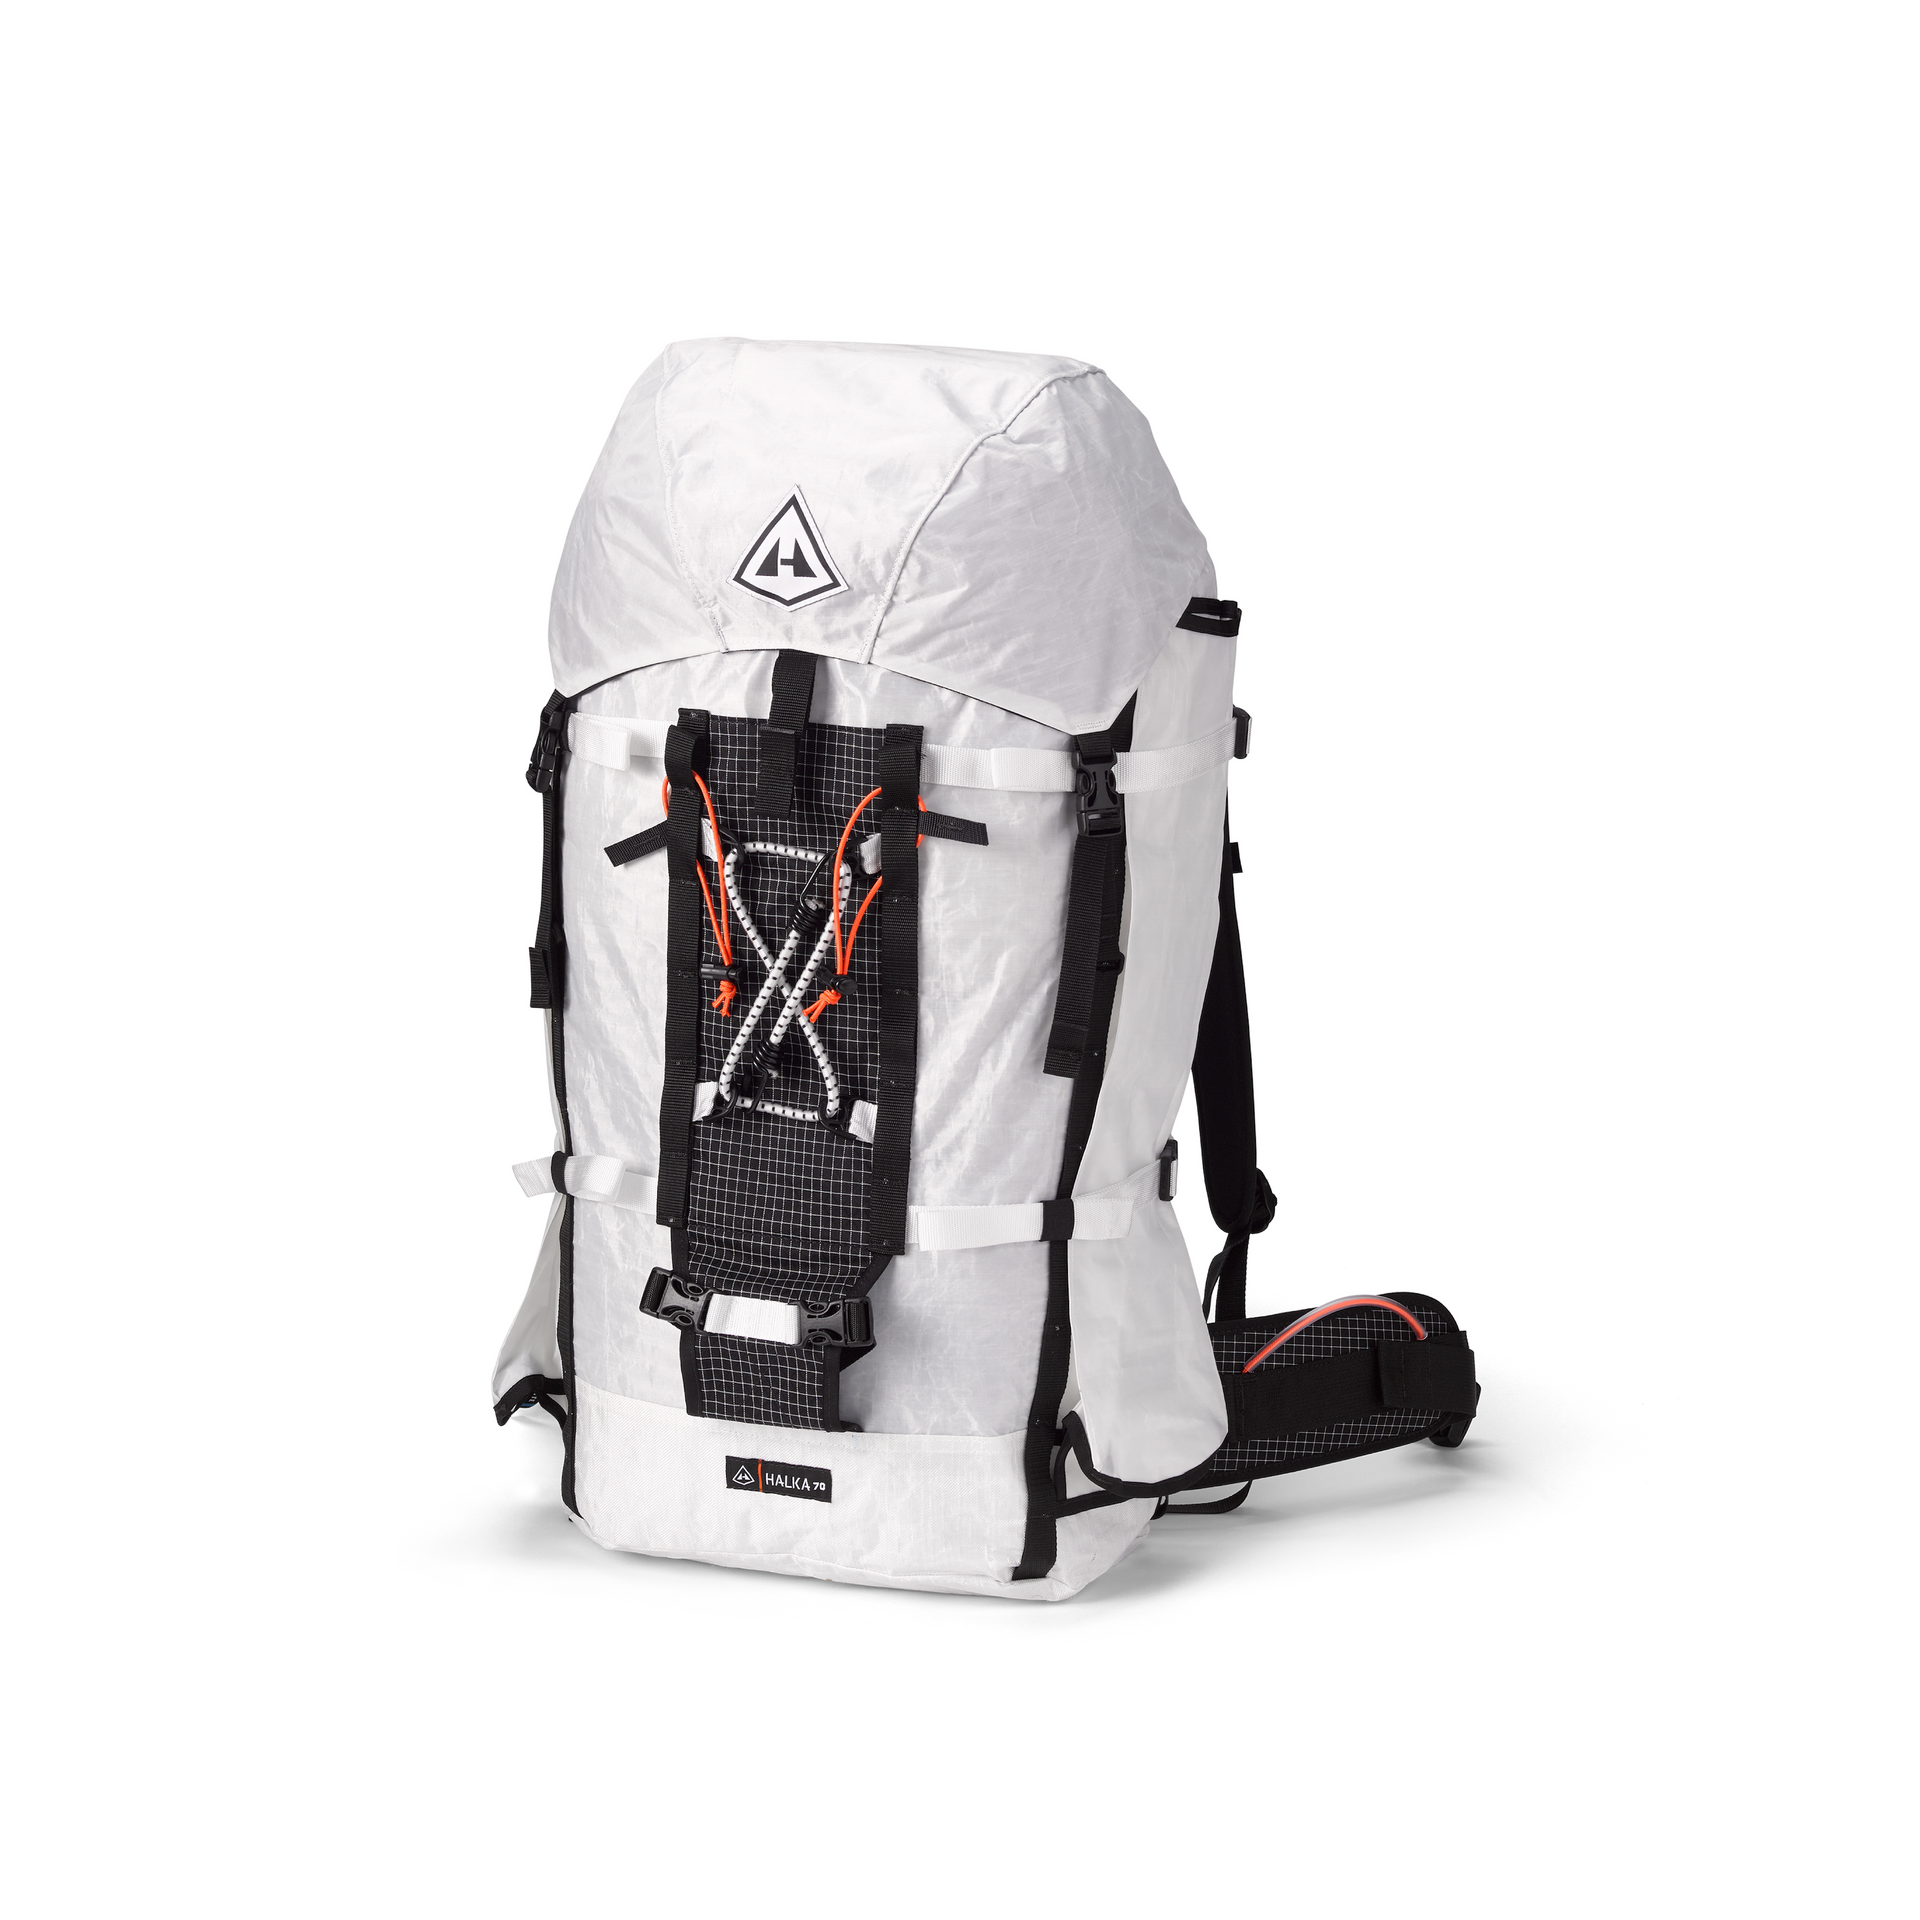 A white backpack with orange straps on it.